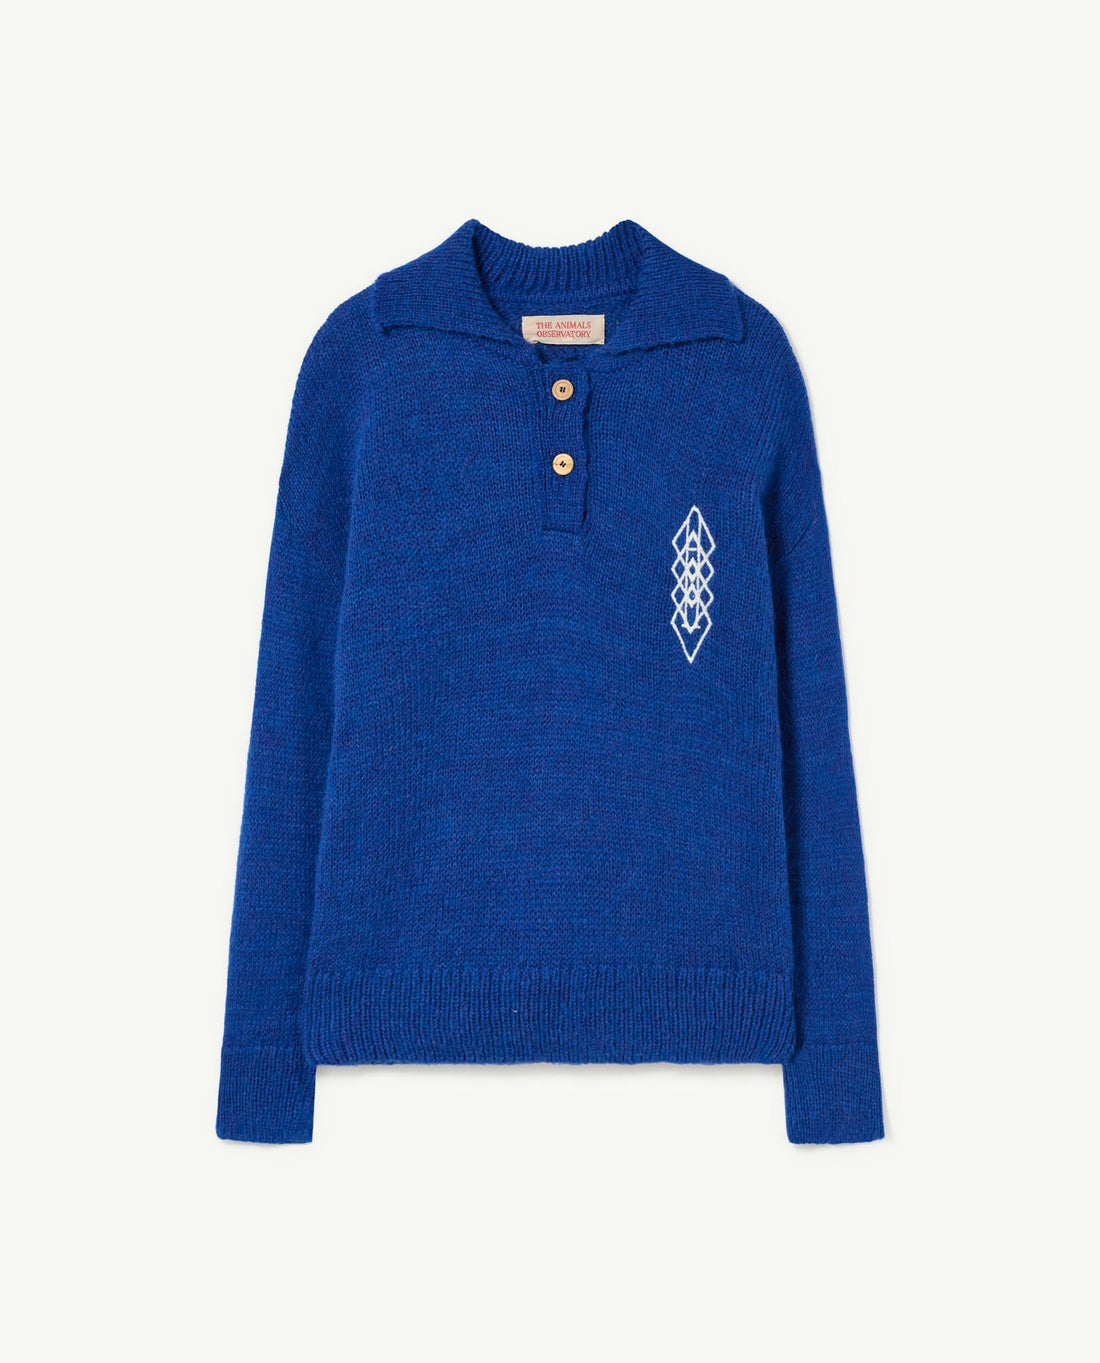 The animals observatory - Raven kids sweater - Blue logos